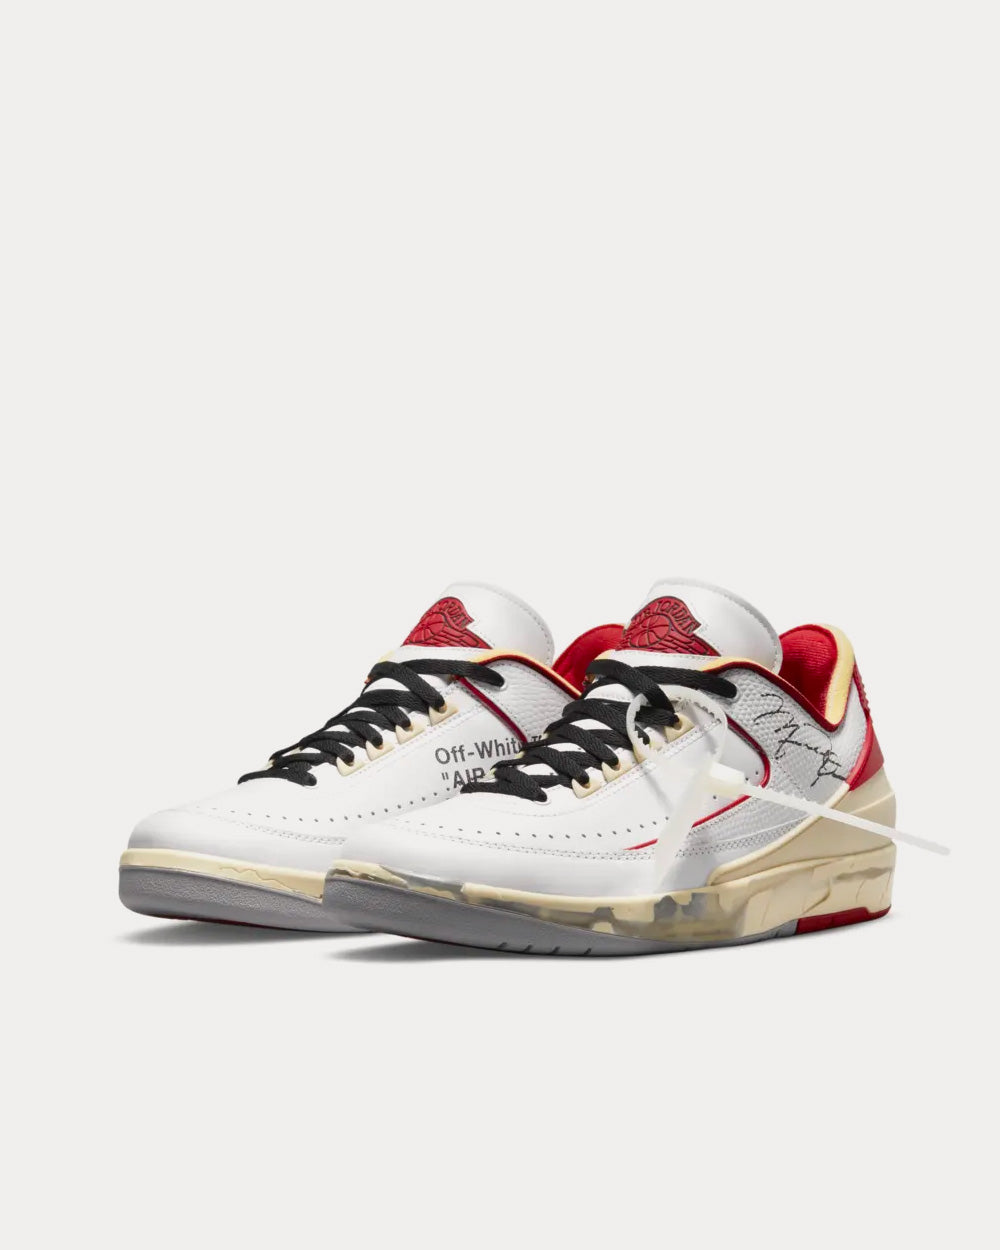 Nike x Off-White Air Jordan 2 Low White and Varsity Red Low Top 